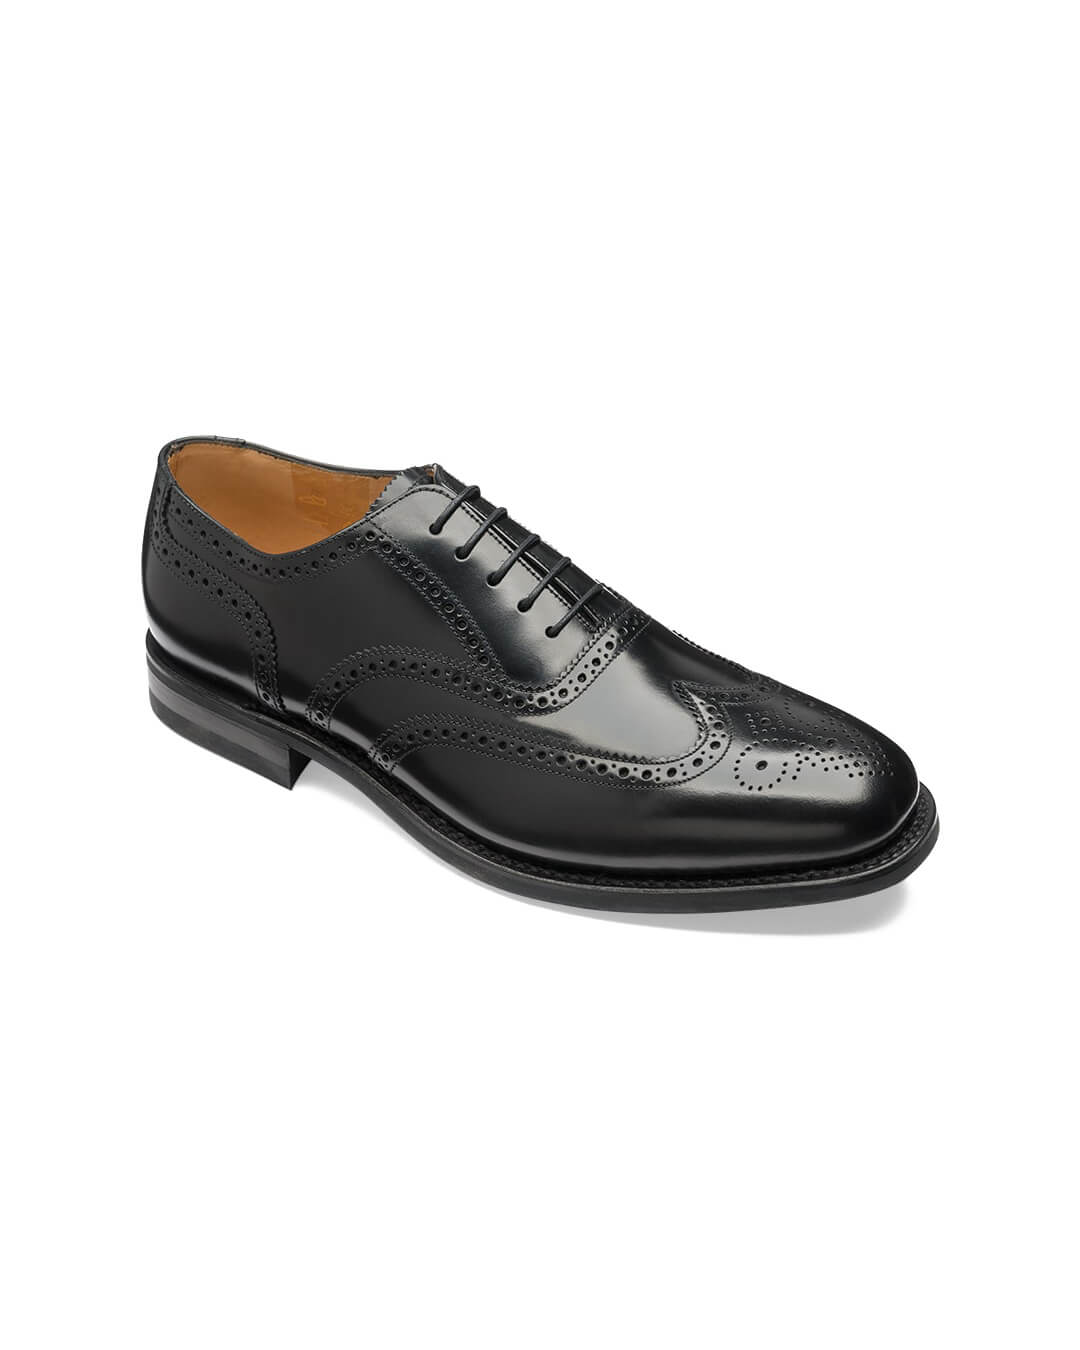 Loake Shoes Loake Black 302 Oford Wingtip Brogues Shoes